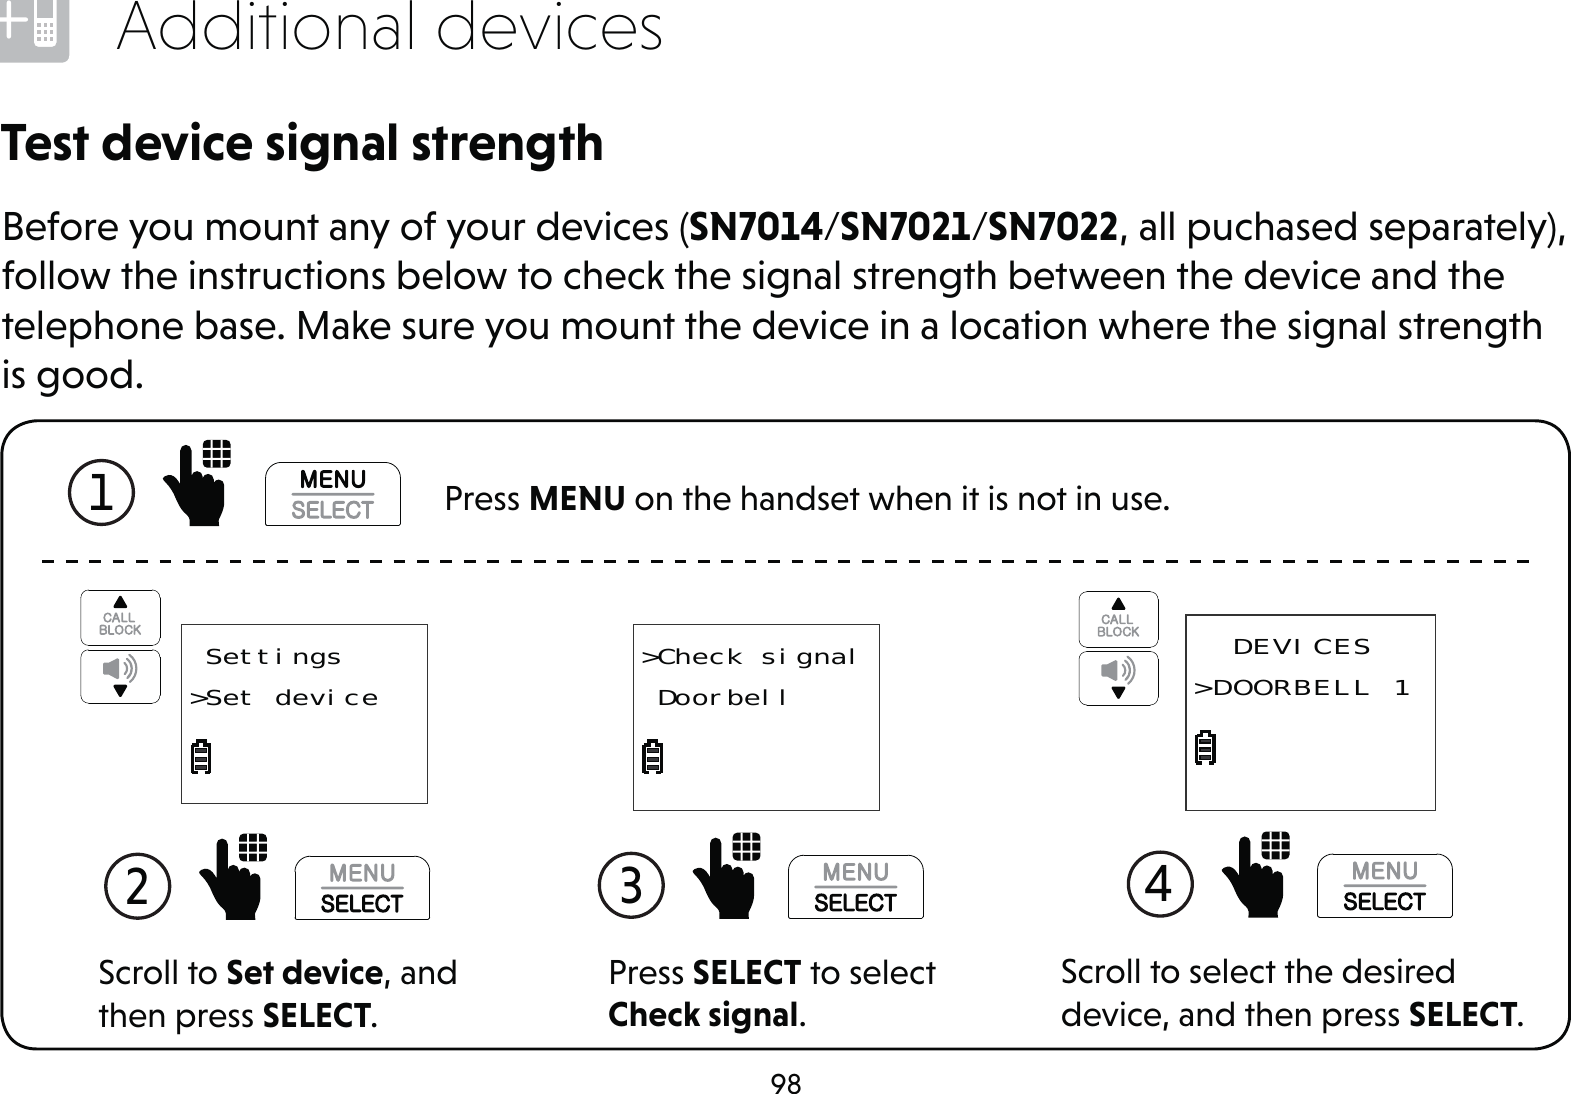 98Additional devicesTest device signal strengthBefore you mount any of your devices (SN7014/SN7021/SN7022, all puchased separately), follow the instructions below to check the signal strength between the device and the telephone base. Make sure you mount the device in a location where the signal strength is good.1   Press MENU on the handset when it is not in use.Scroll to Set device, and then press SELECT.2  Settings&gt;Set deviceScroll to select the desired device, and then press SELECT.4   DEVICES&gt;DOORBELL 1Press SELECT to select Check signal.3 &gt;Check signal Doorbell